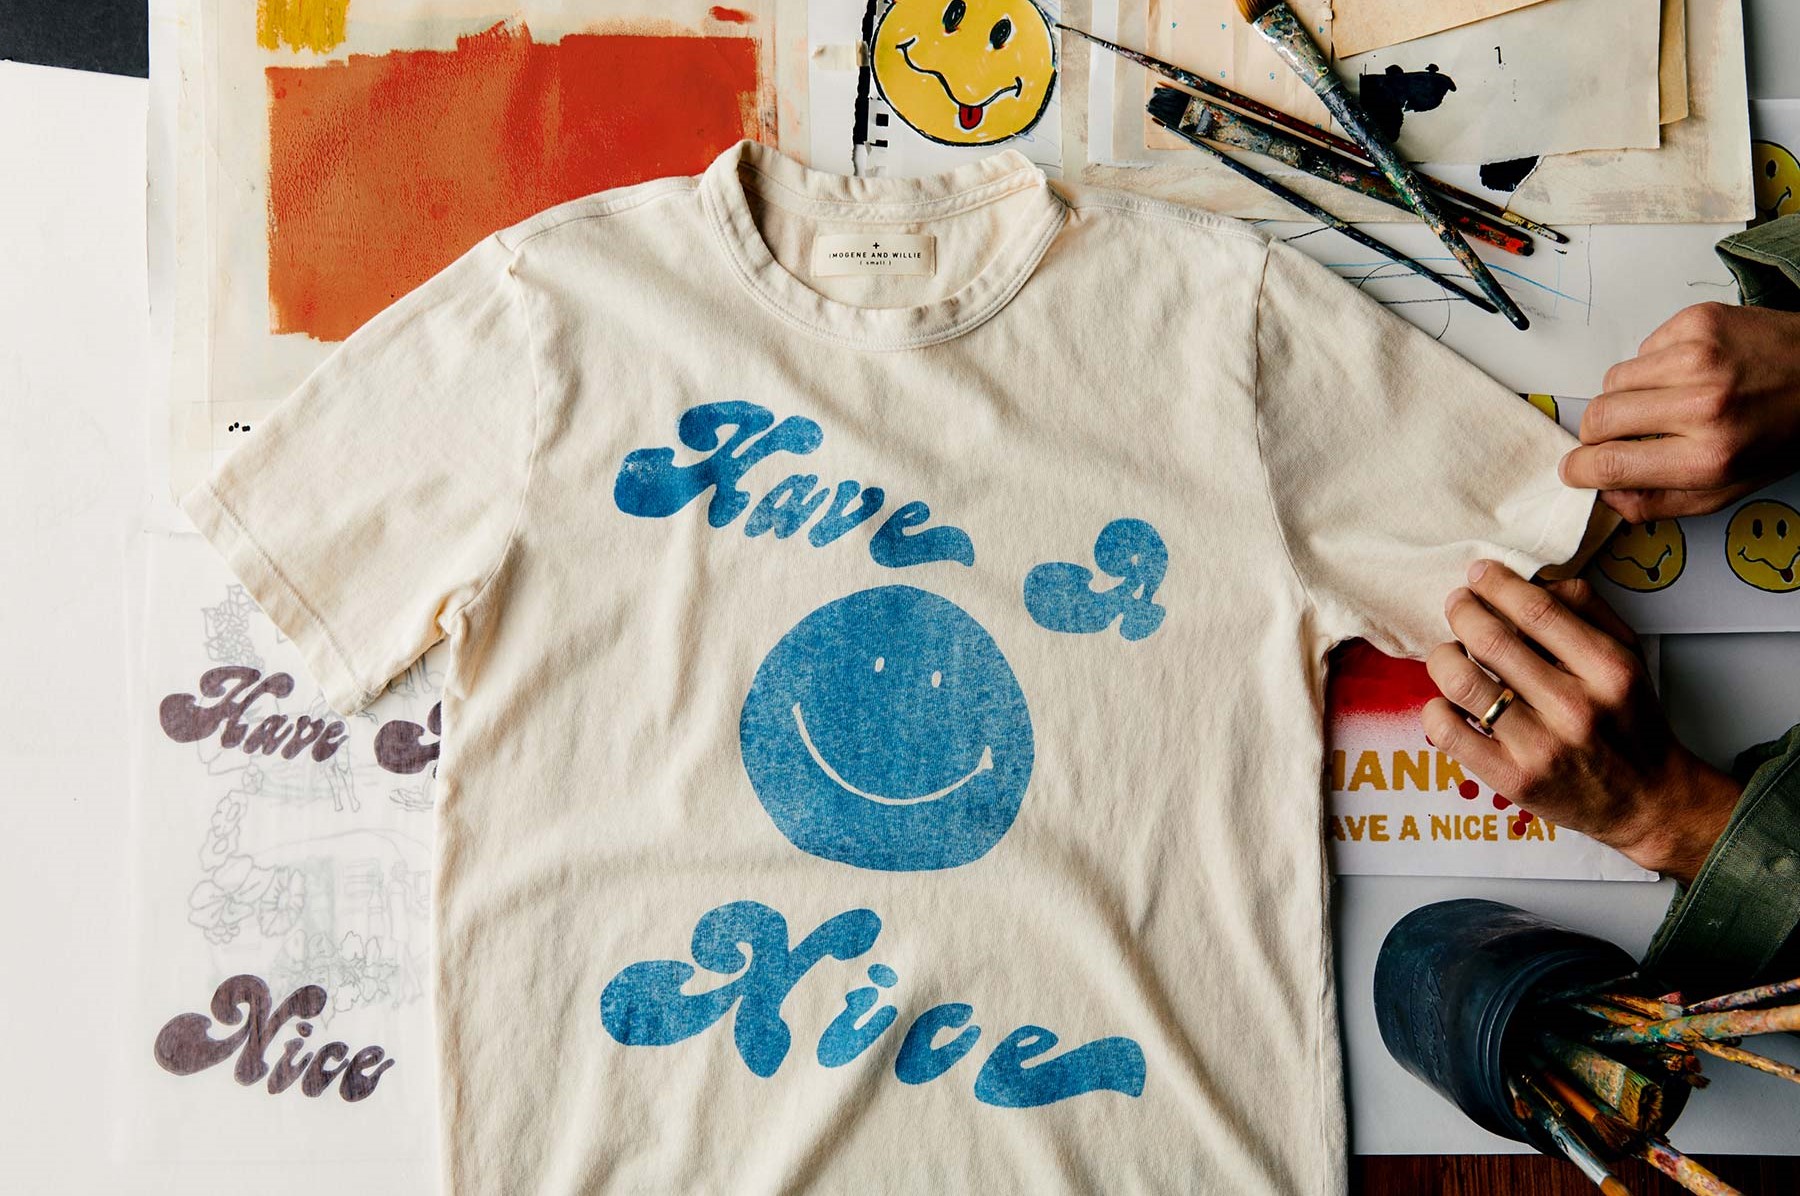 10 of the best graphic T-shirts from Imogene + Willie